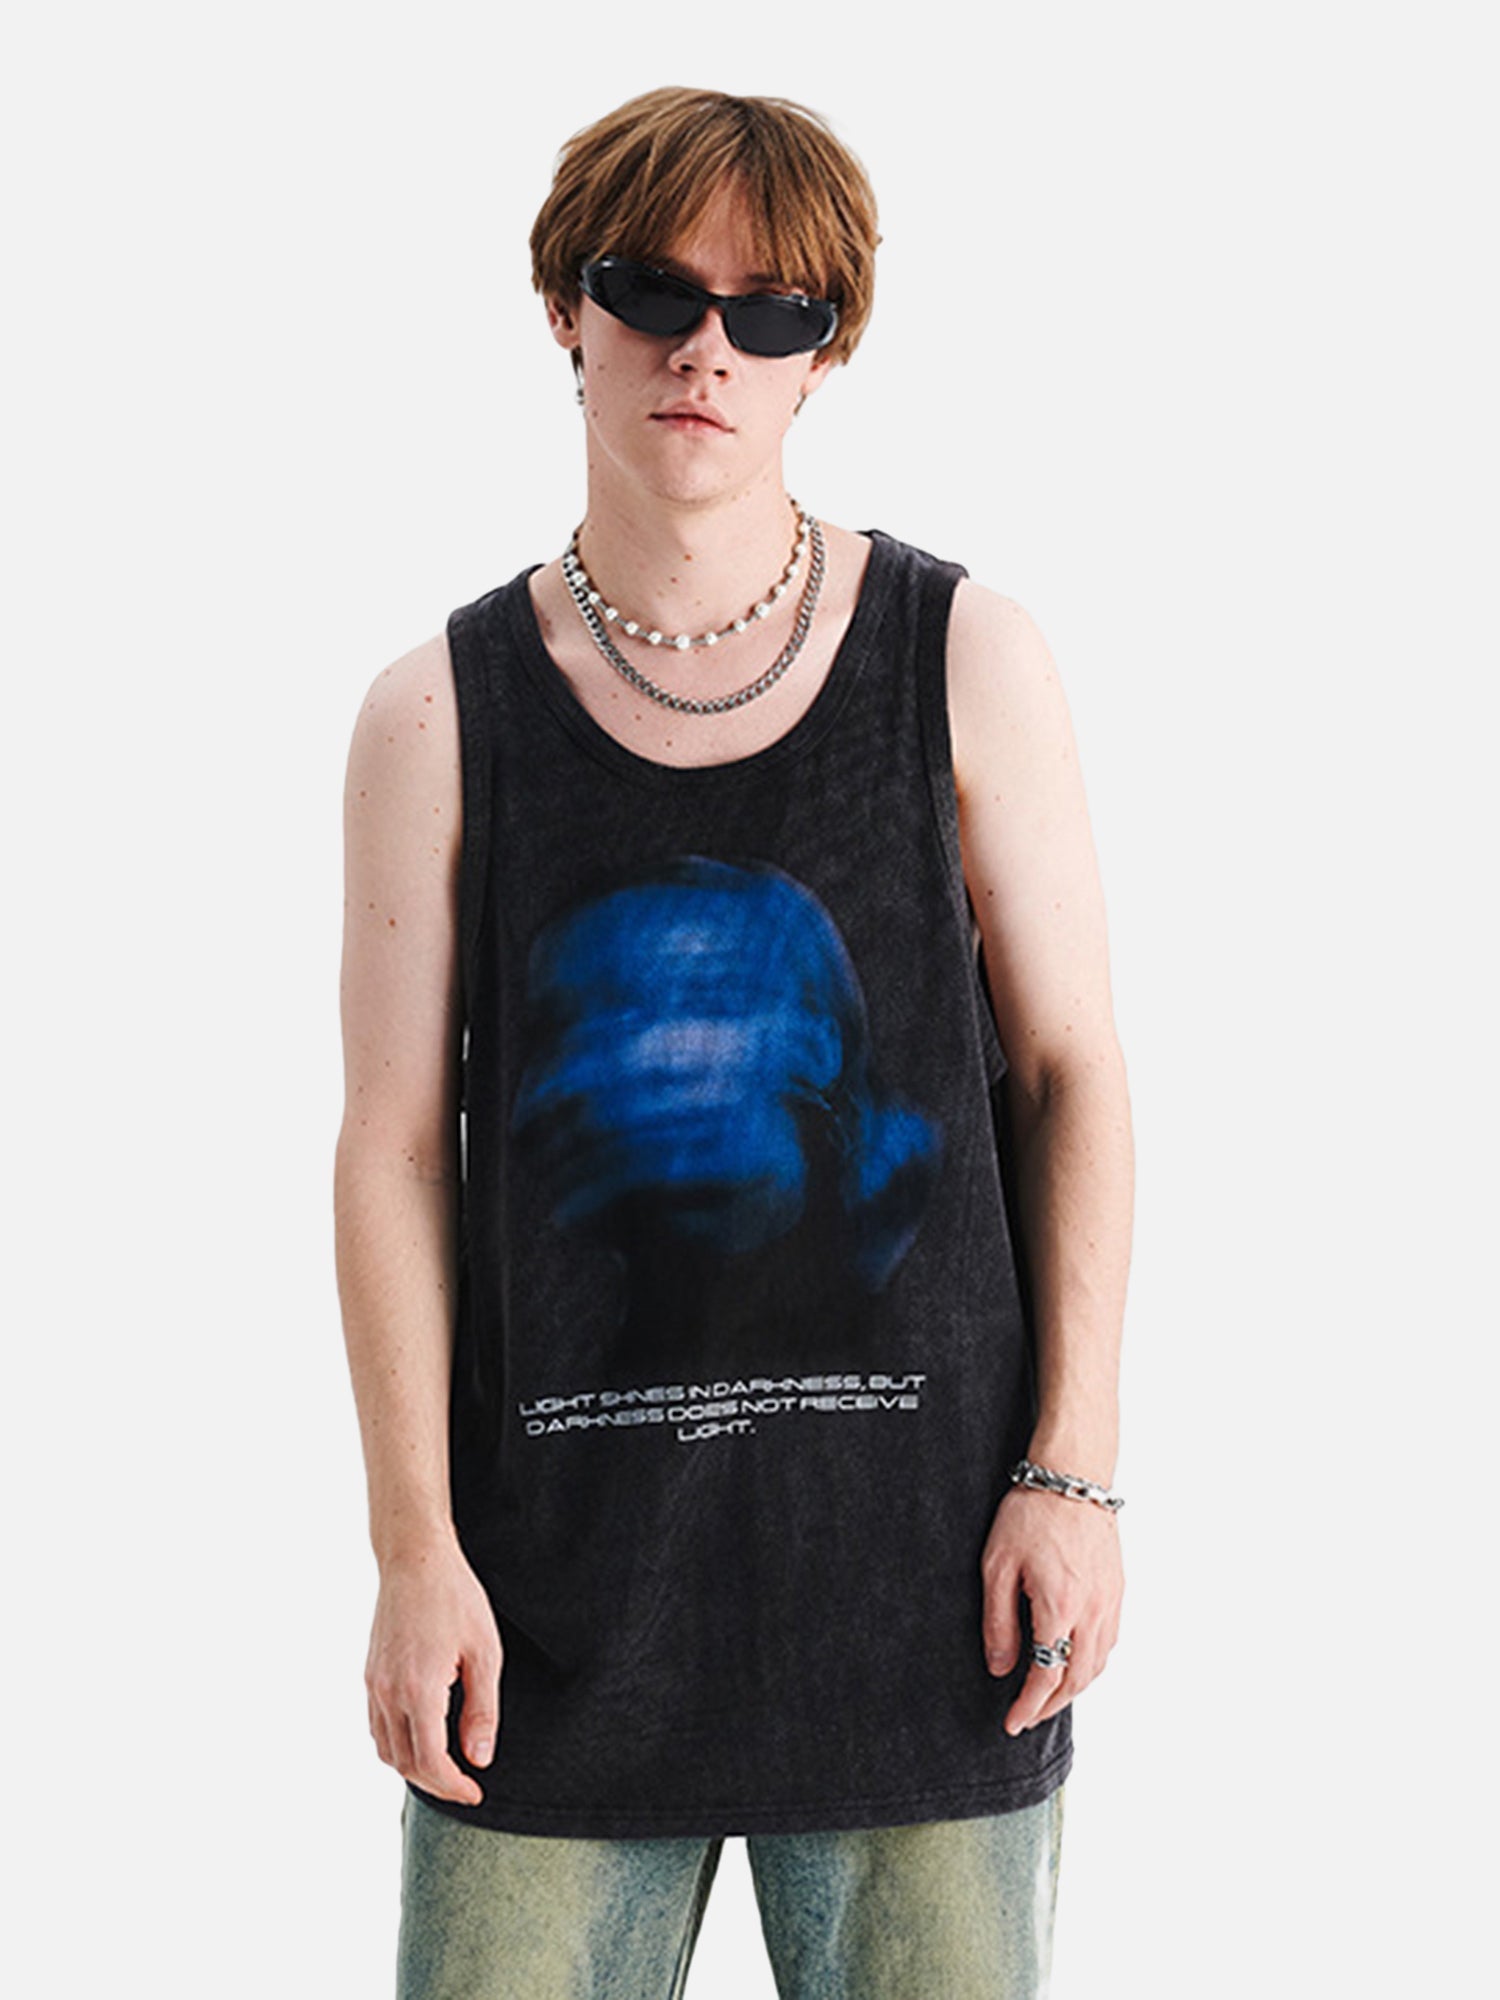 Thesupermade Washed Distressed Blurred Silhouette Print Vests